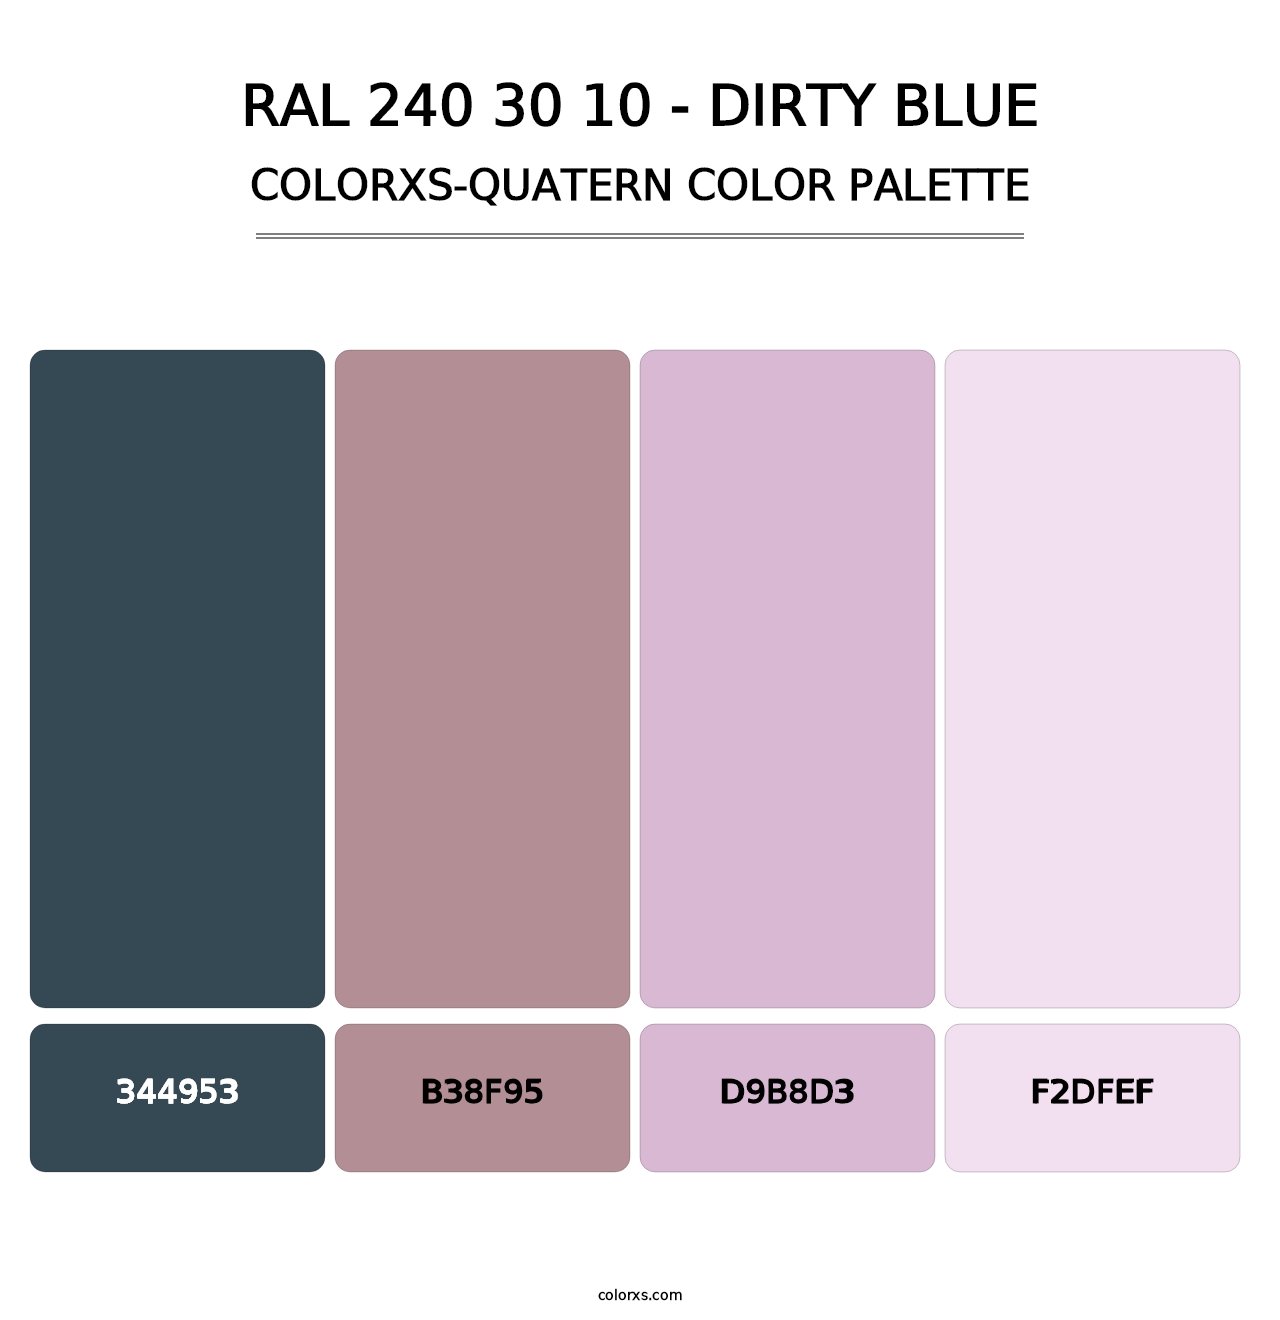 RAL 240 30 10 - Dirty Blue - Colorxs Quatern Palette